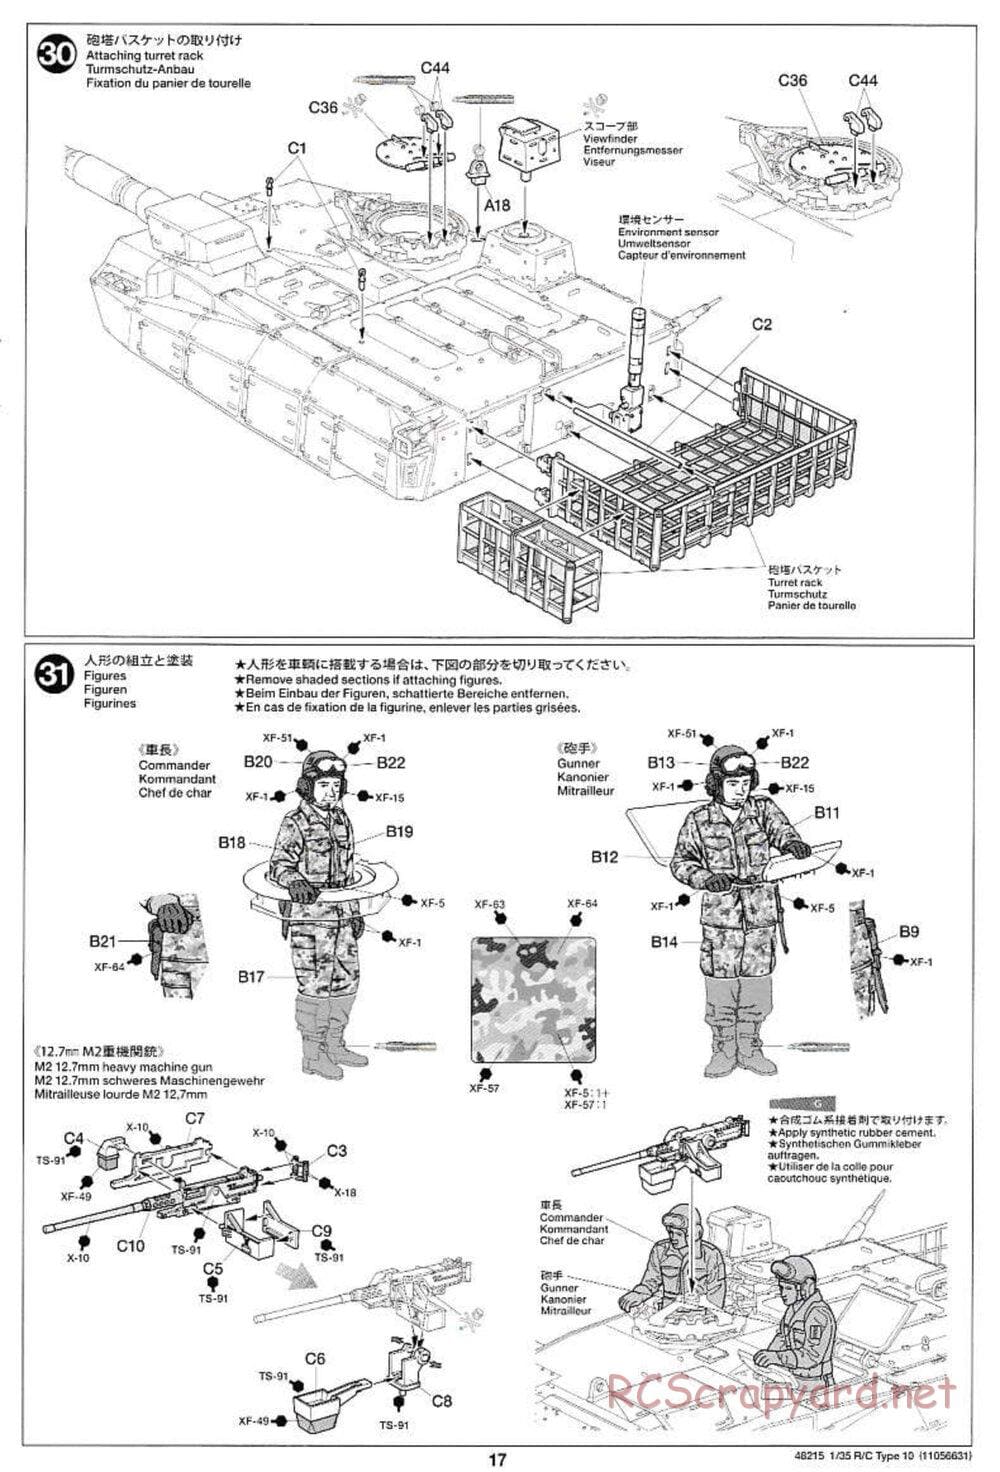 Tamiya - JGSDF Type 10 Tank - 1/35 Scale Chassis - Manual - Page 17